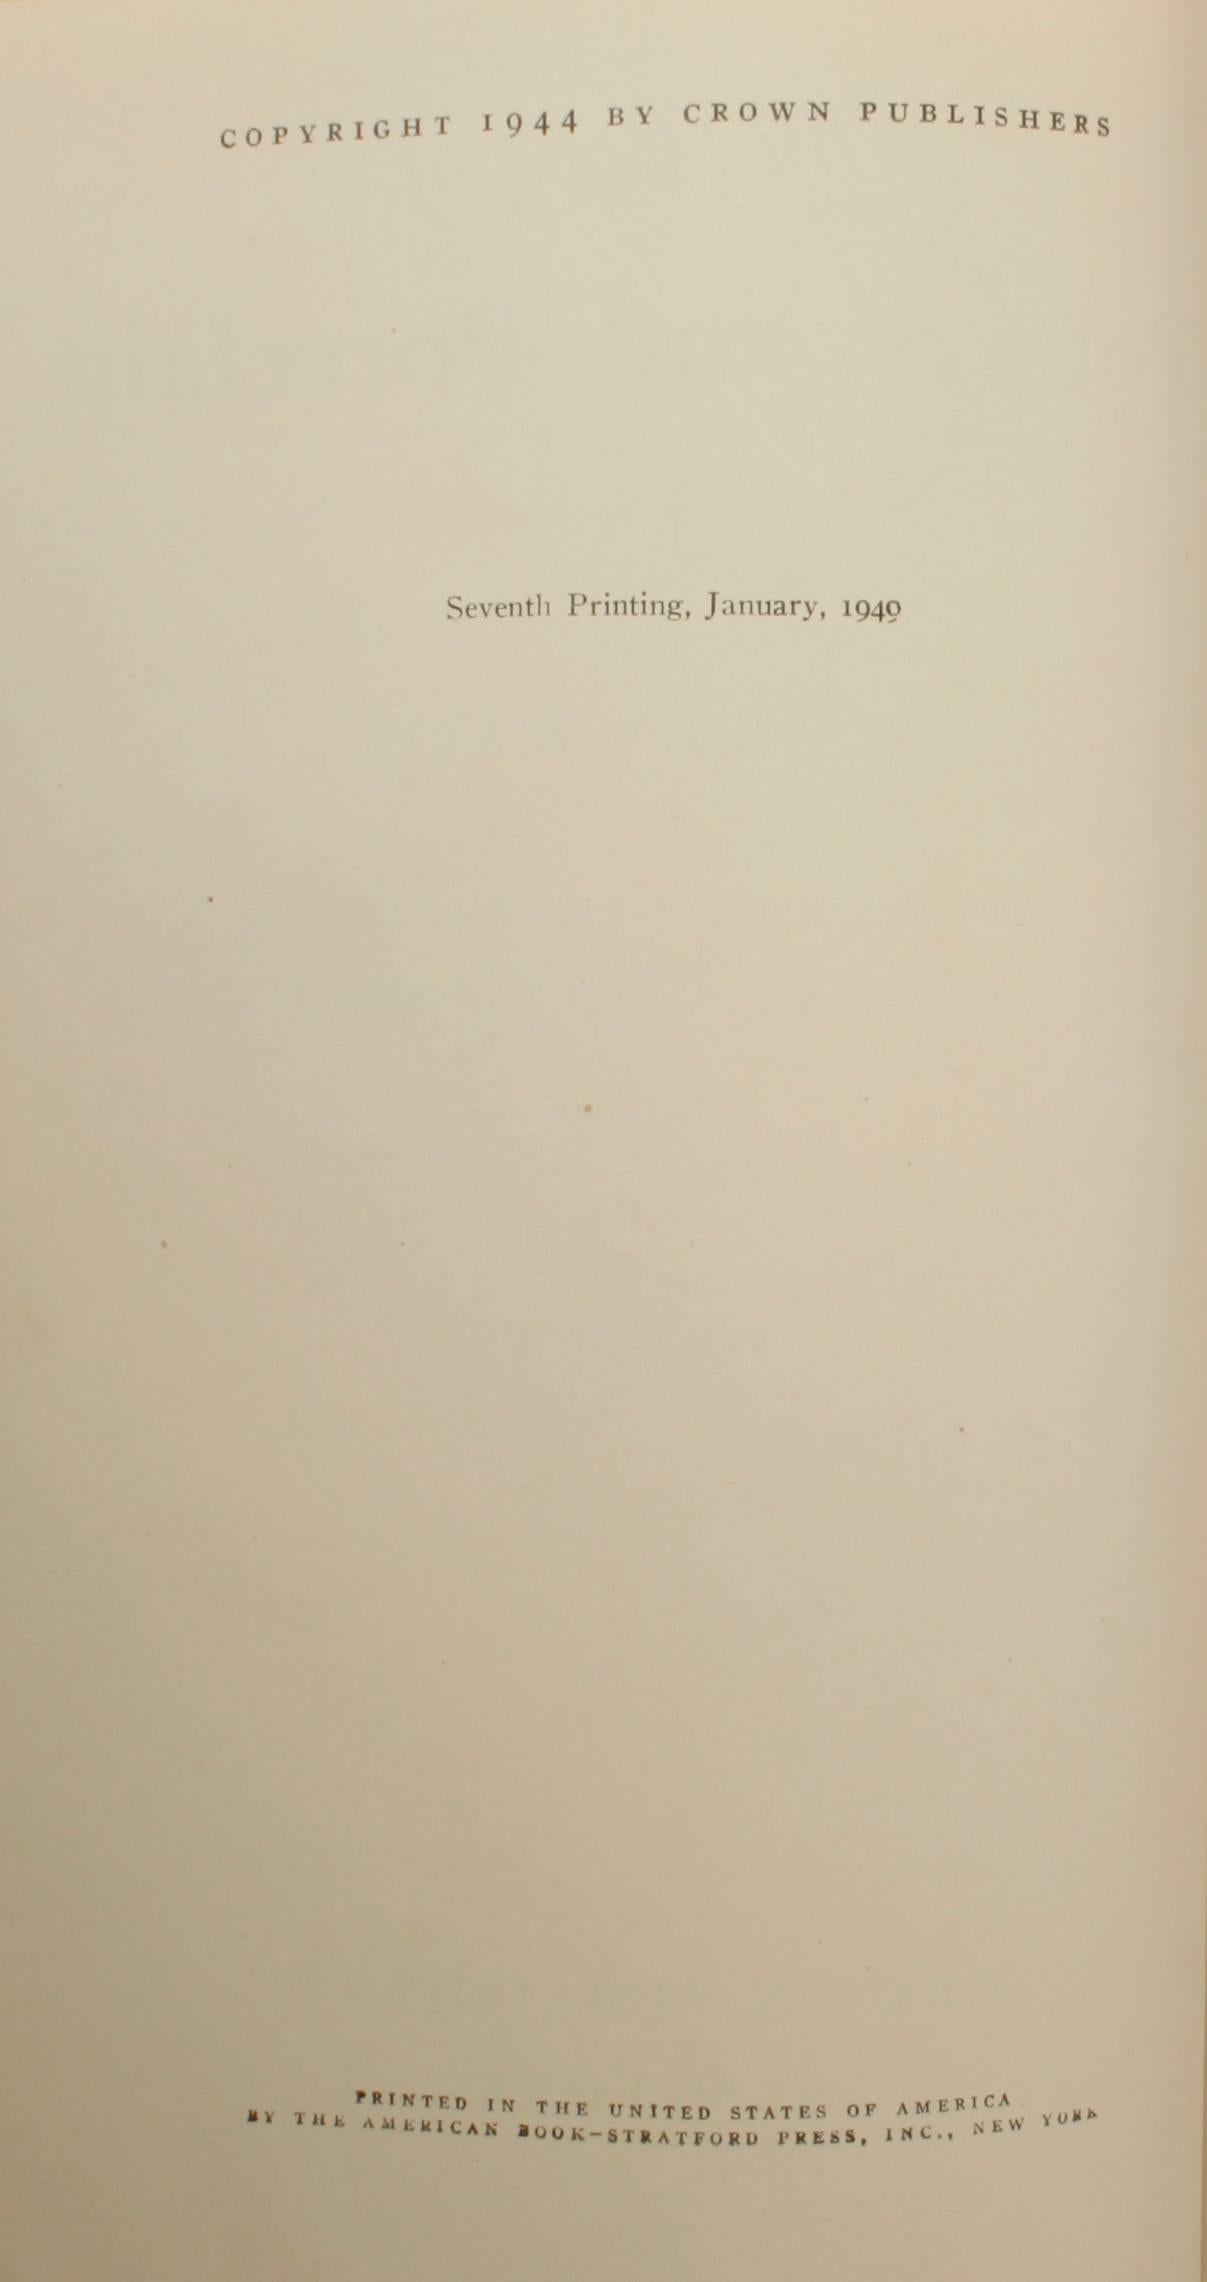  The Book of Pottery and Porcelain in 2 Volumes 2